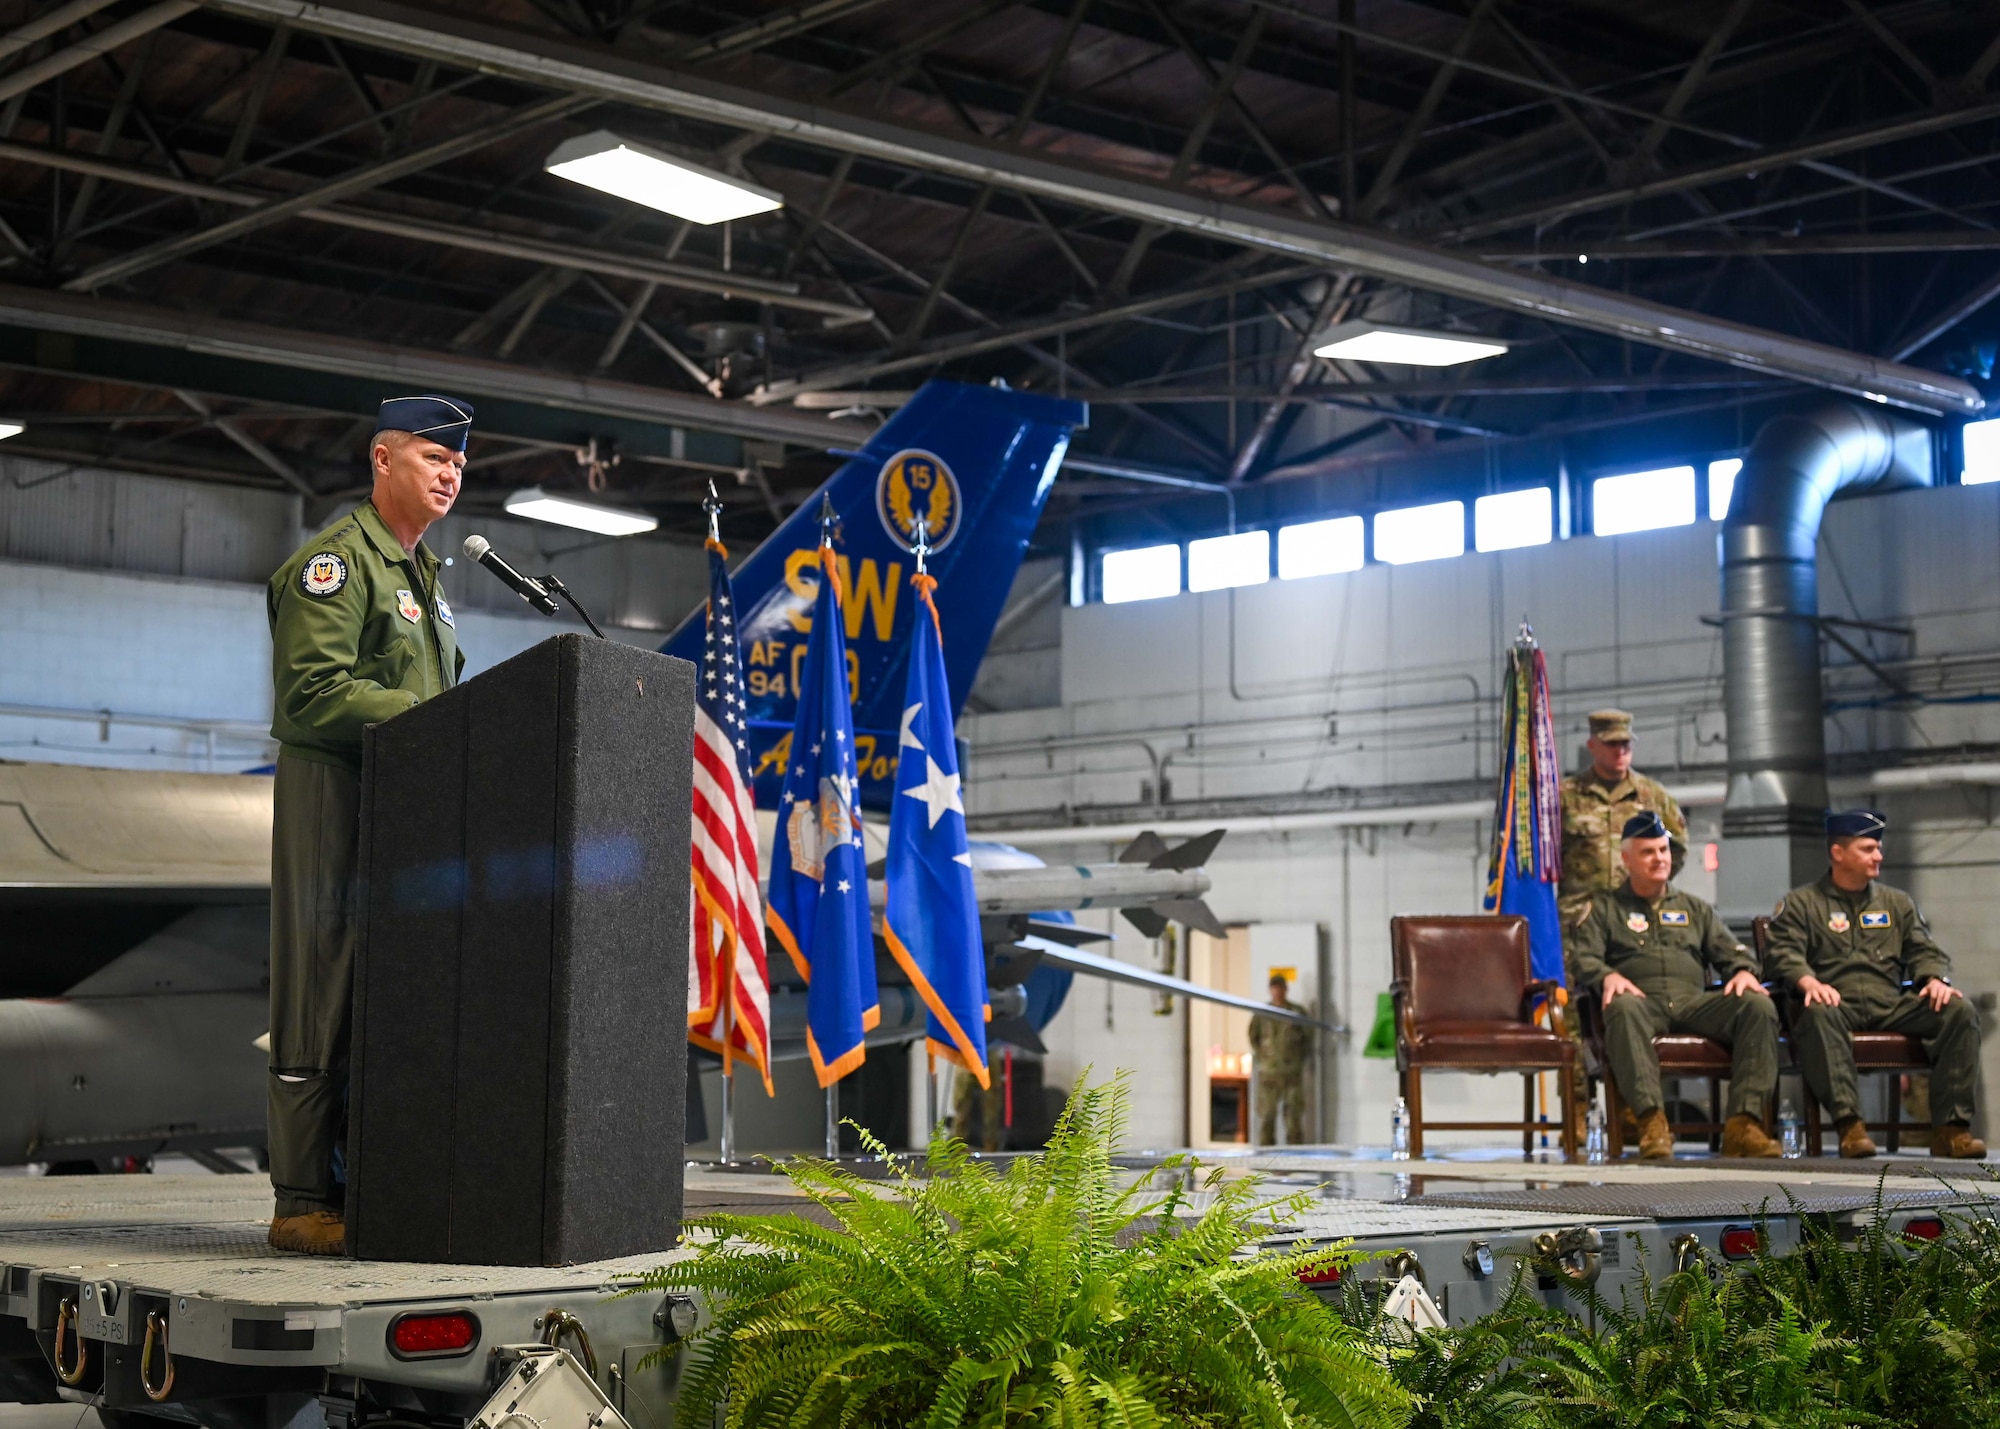 U.S. Air Force Maj. Gen. David B. Lyons assumed command of Fifteenth Air Force from Maj. Gen. Michael G. Koscheski during a change of command ceremony Jan. 5 at Shaw Air Force Base, South Carolina. Gen. Mark Kelly, commander of Air Combat Command, presided over the ceremony.